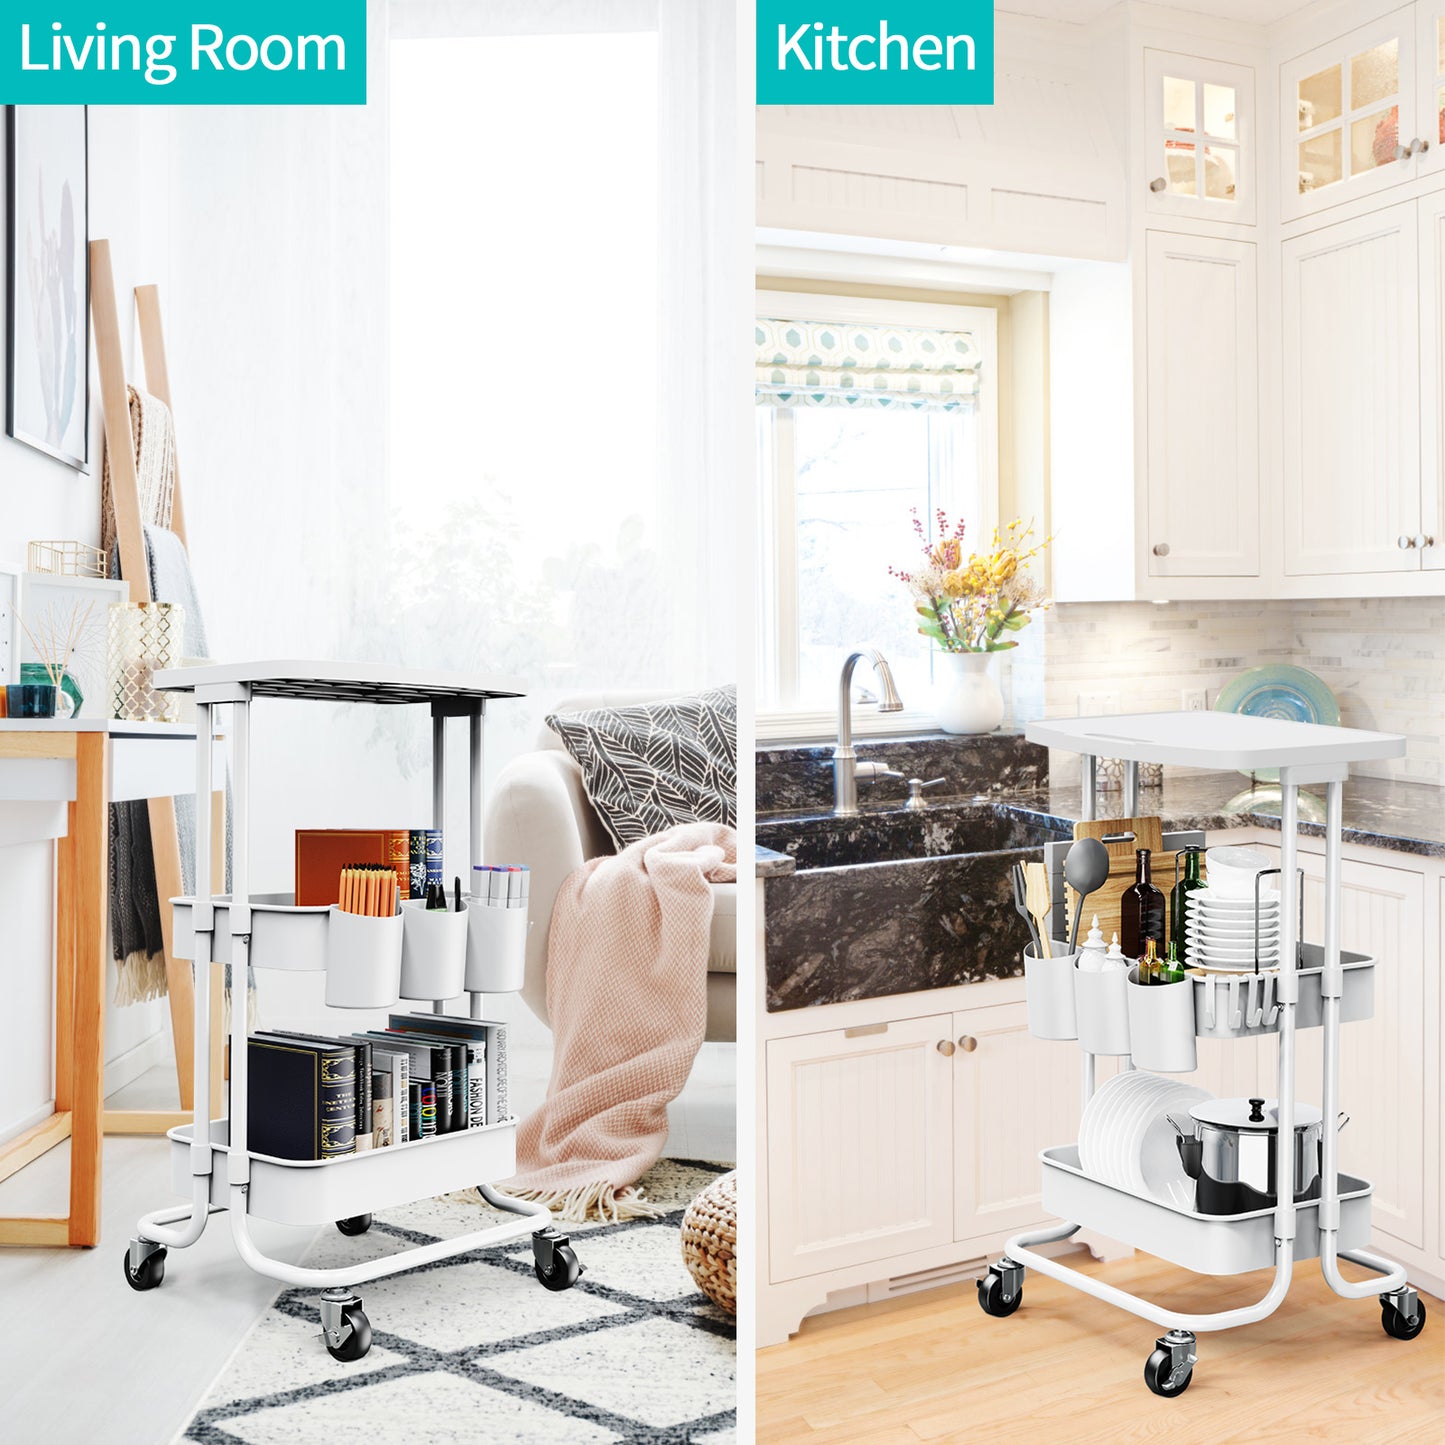 white rolling cart in the living room or kitchen